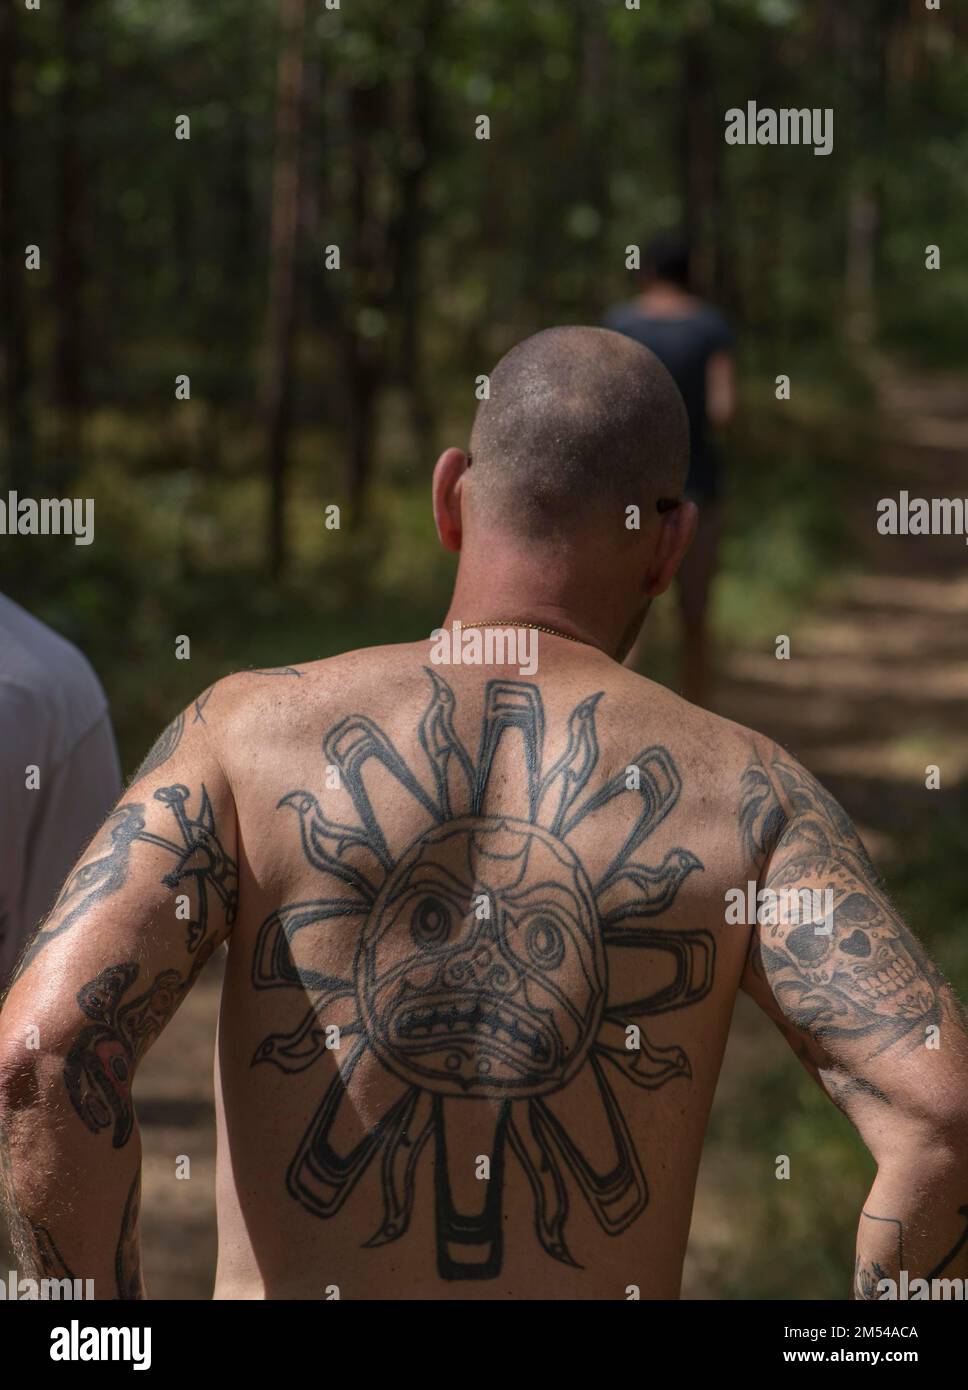 Man with tattoos on his back and arms walking through a forest, Bavaria, Germany Stock Photo